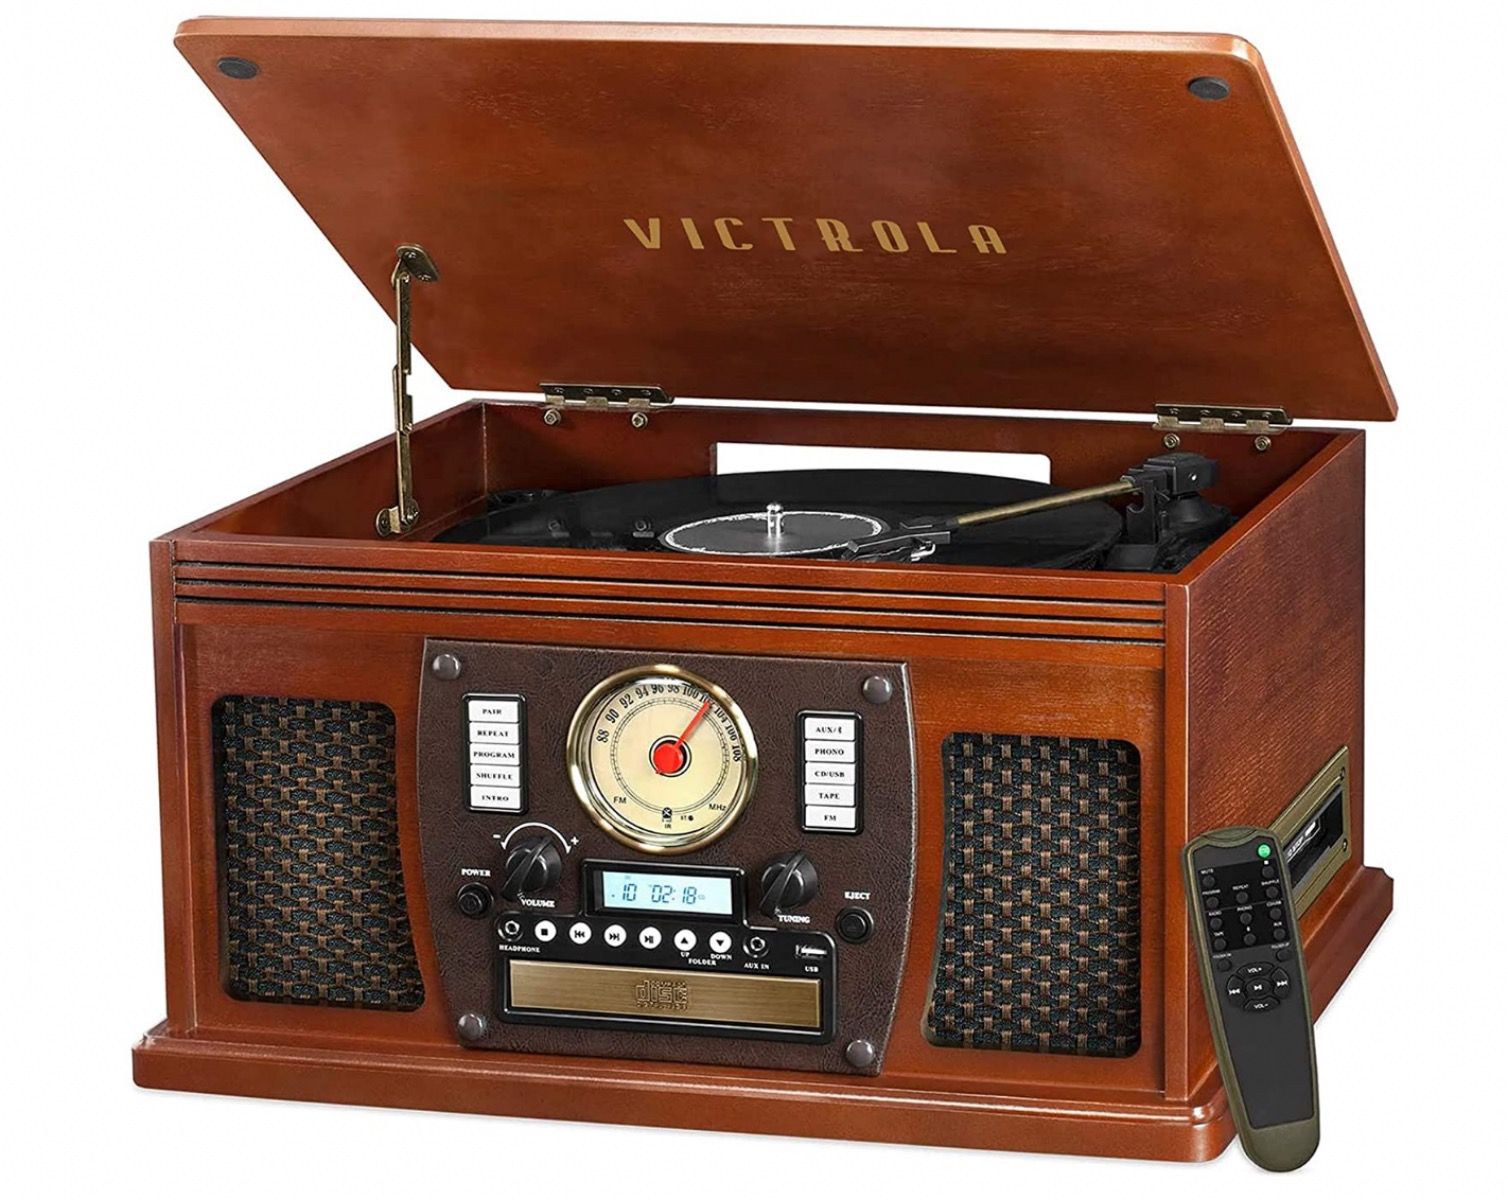 Victrola 8-in-1 shot with lid up and remote control by its side